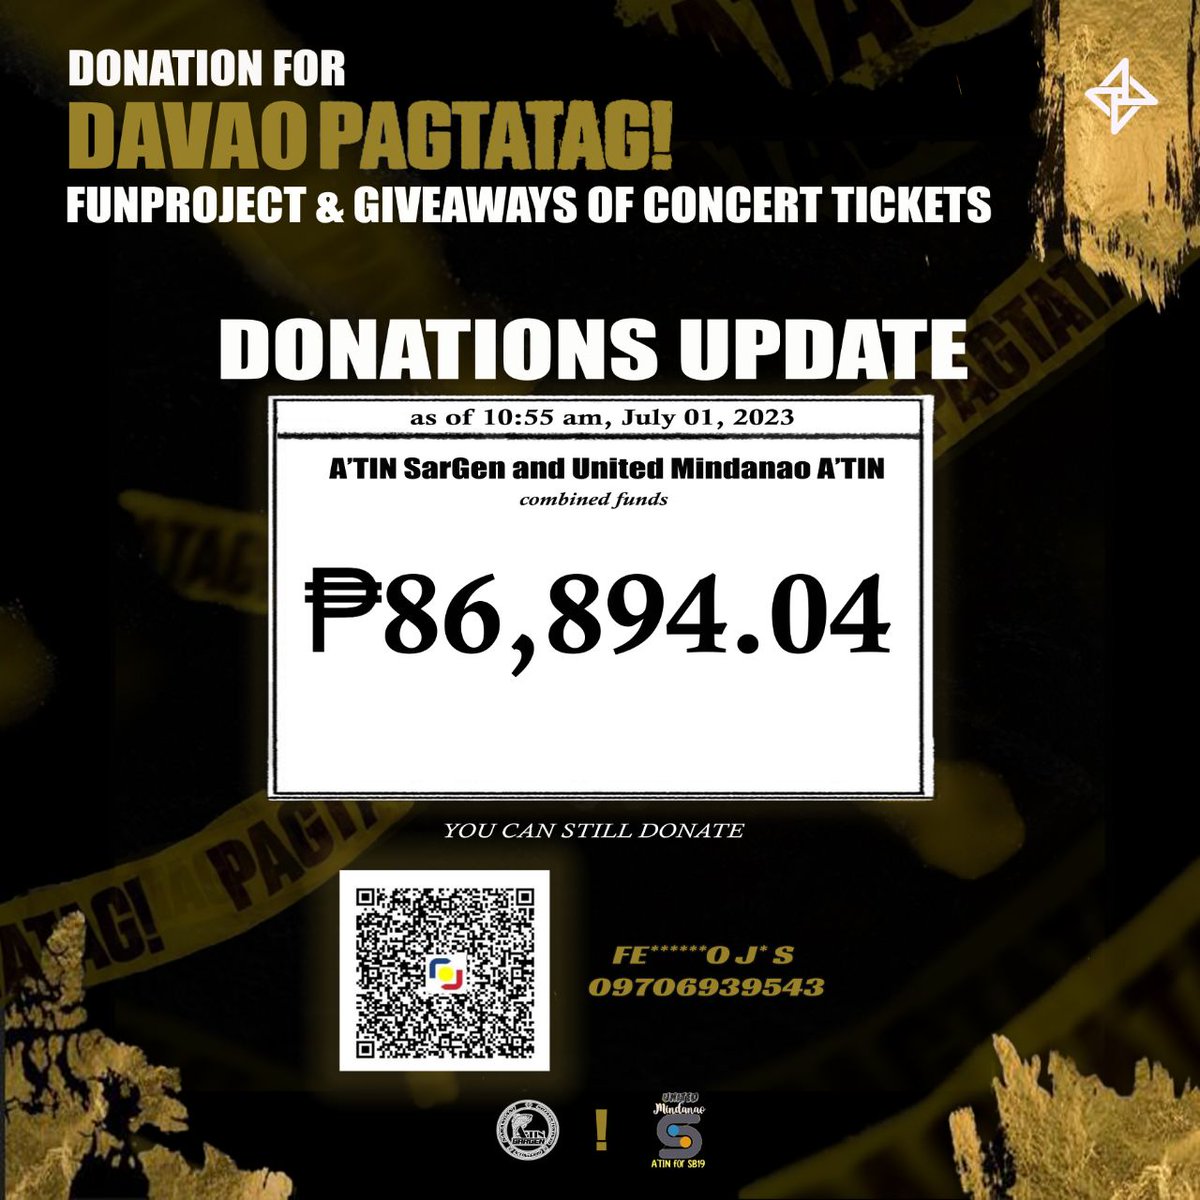 📢 UPDATE: Phenomenal news! We've reached a staggering Php 86,894.04! 🎉 We extend our deepest gratitude for your unwavering generosity and dedication. 

#PagtatagDavaoCon Donation Drive continues until July 3, 11:59pm

#SB19xATIN